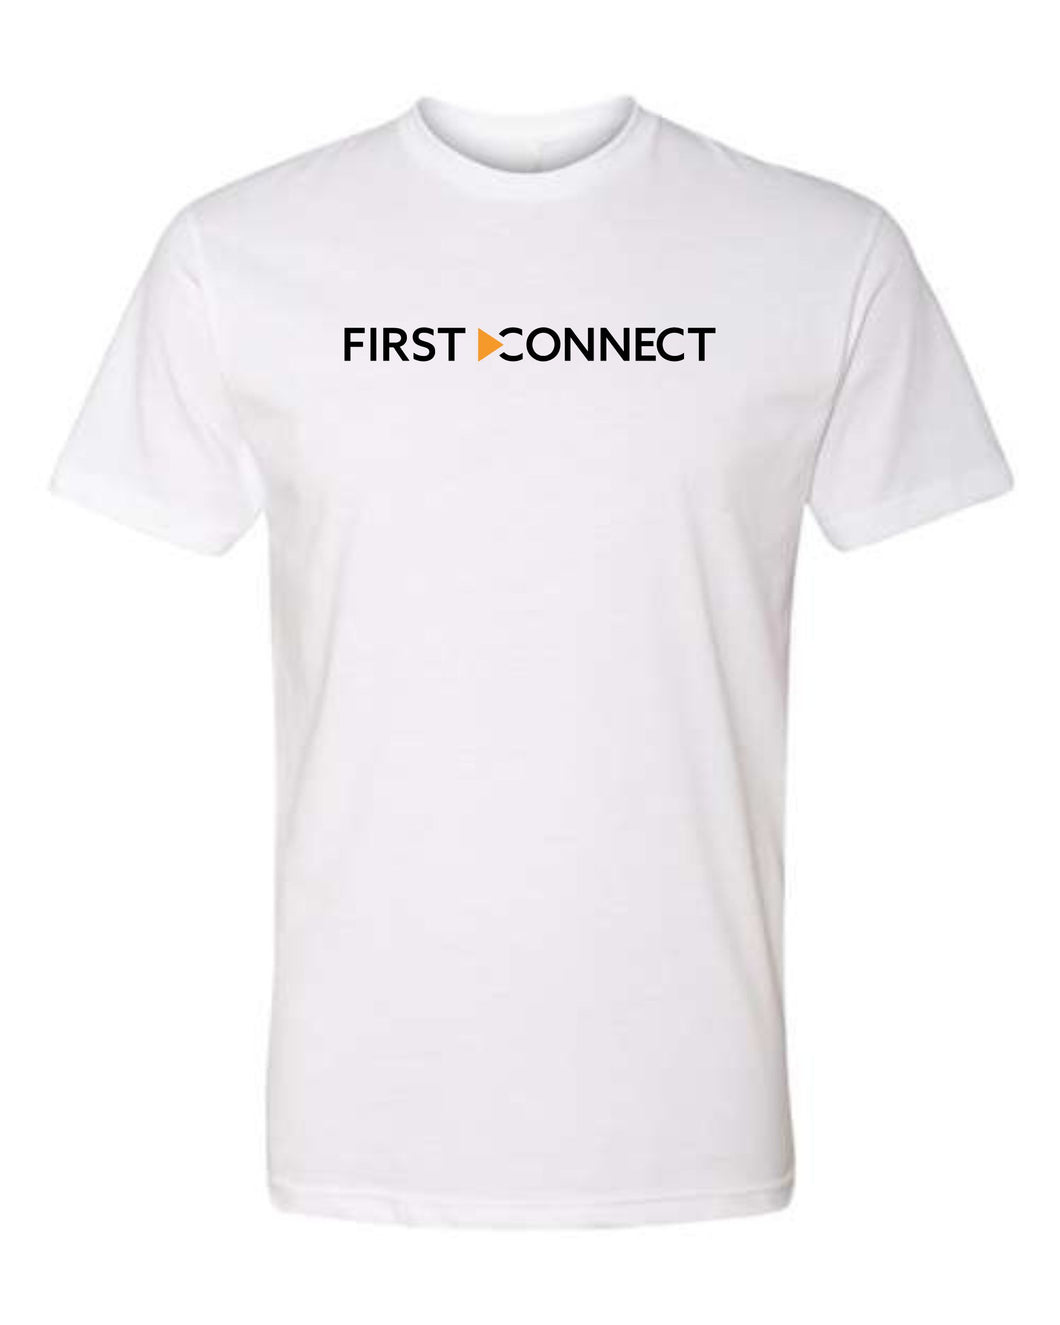 First Connect Men's White T-Shirt